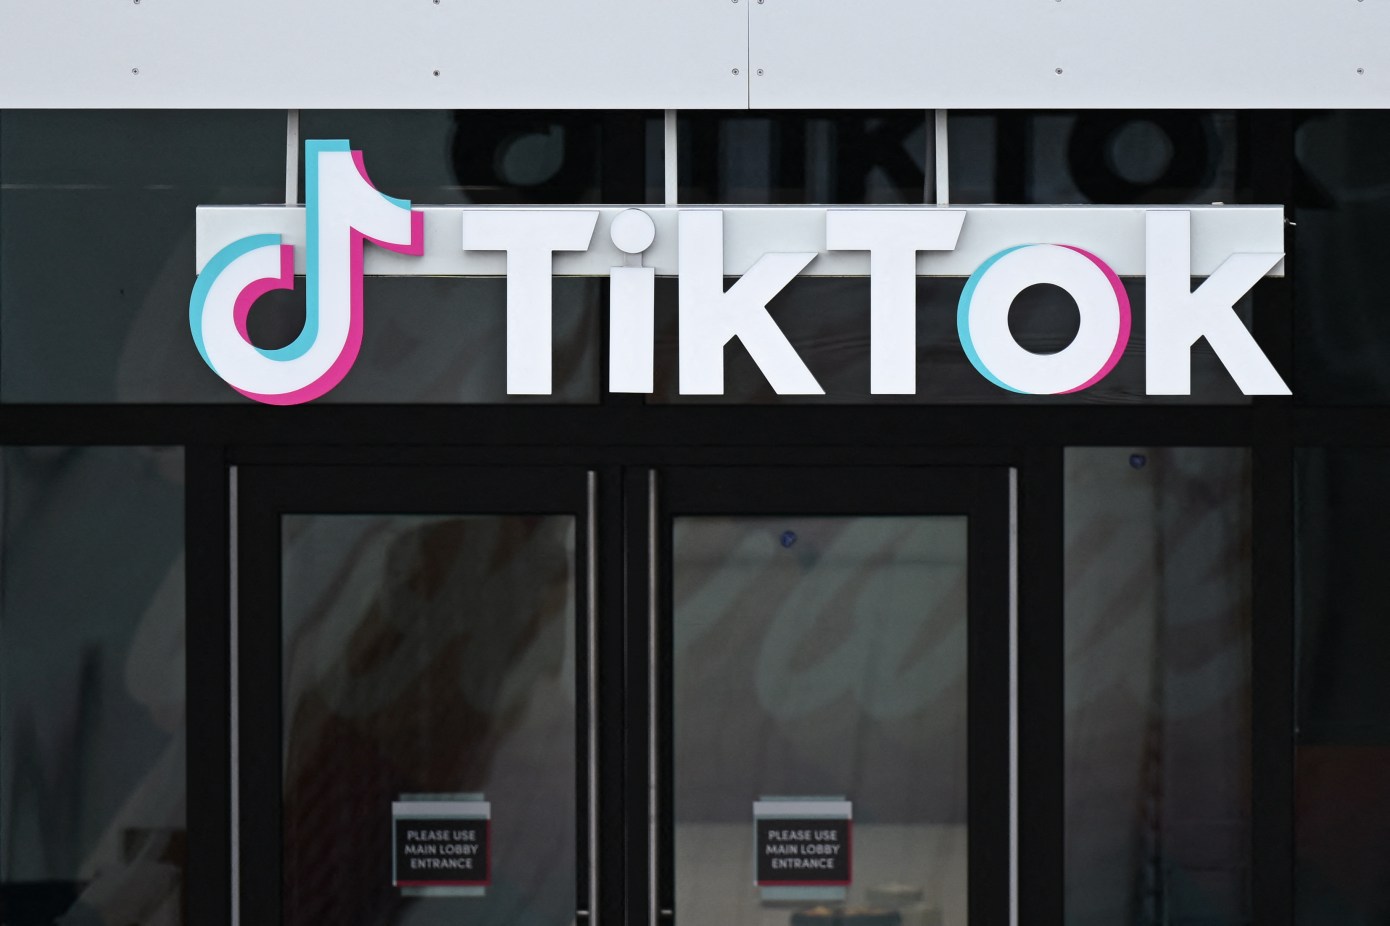 TikTok CEO announces over 150M active users in the U.S.